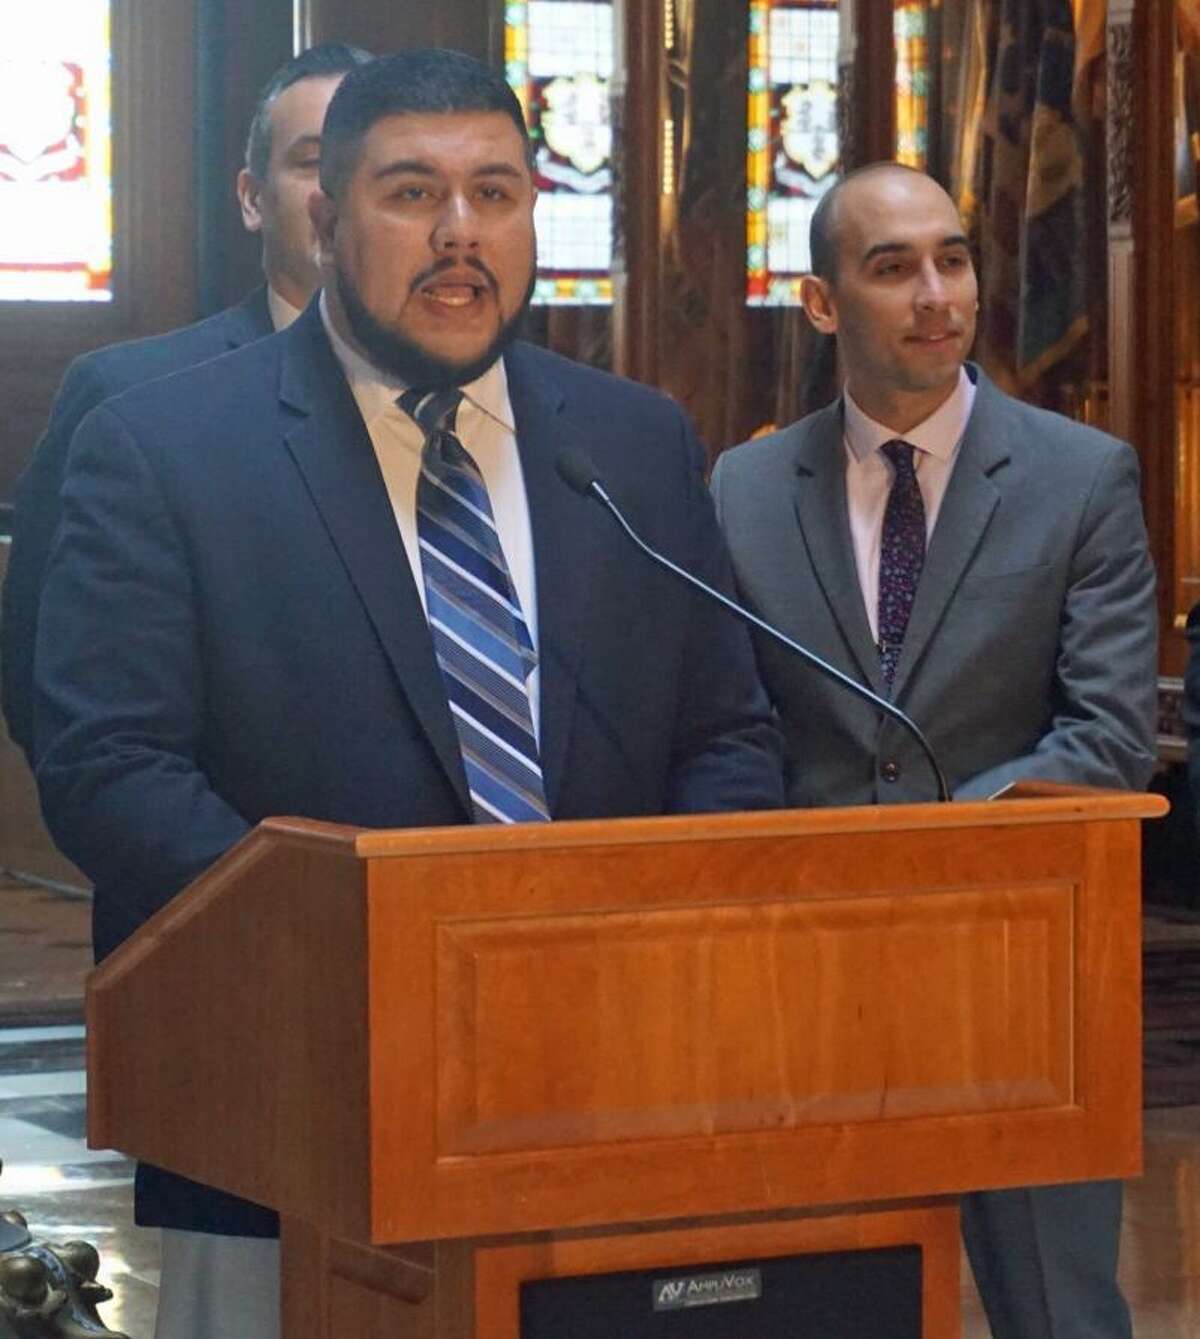 Rep. Christopher Rosario, D-Bridgeport, chair of the Black and Puerto Rican Caucus, outlined the caucus's legislative priorities at the Capitol in Hartford, Conn. on Monday, March 12, 2018.